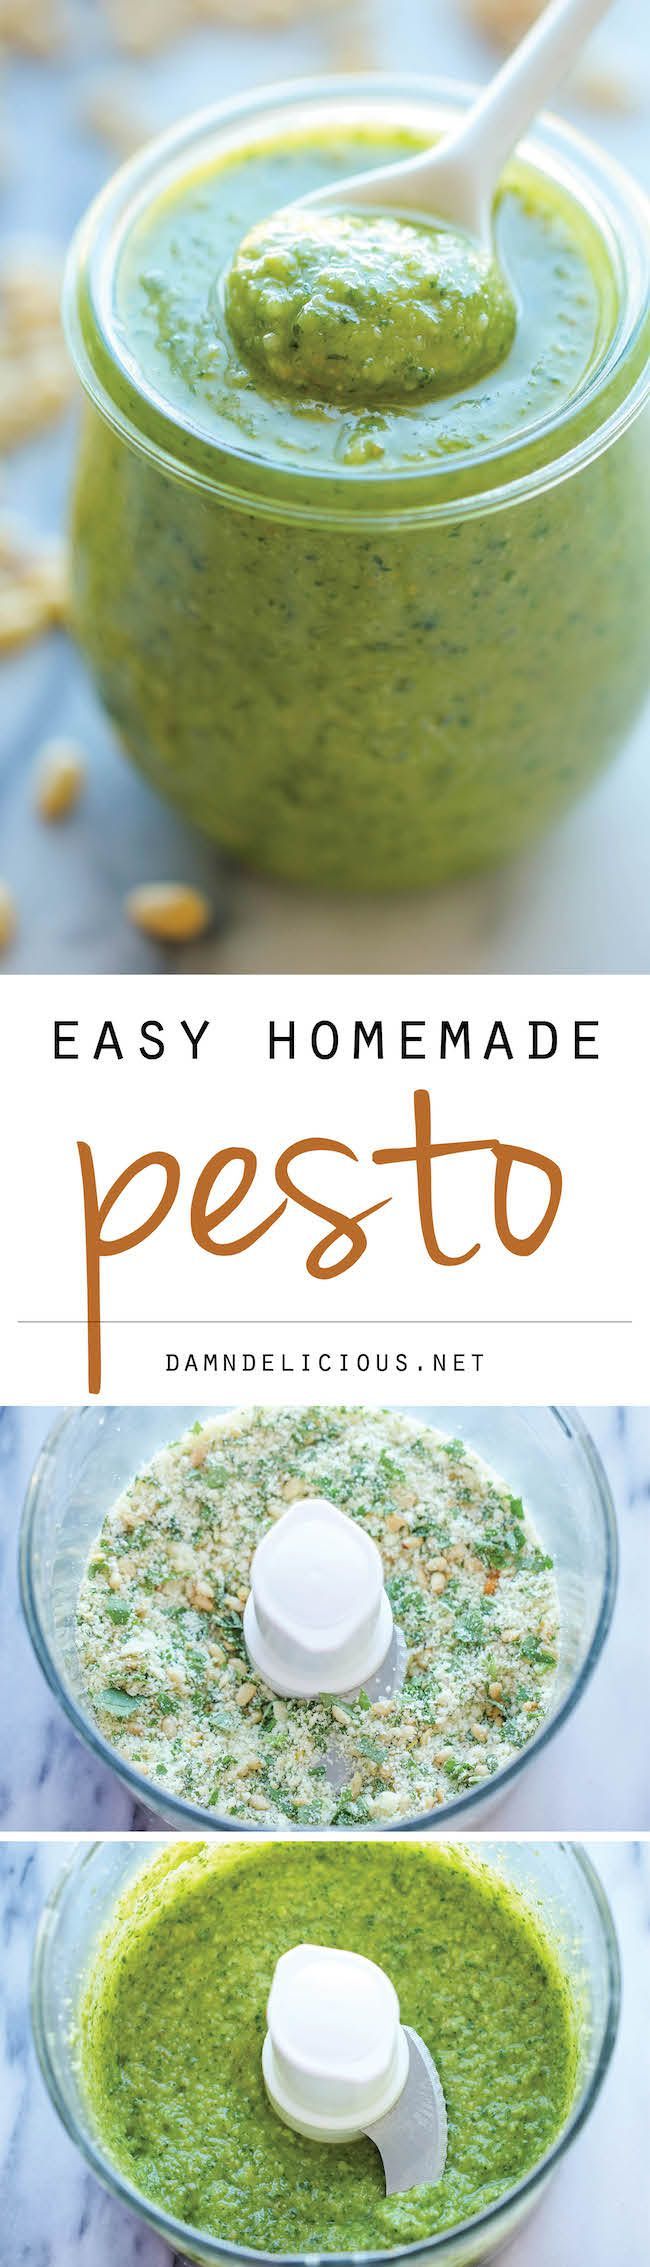 Easy Homemade Pesto – No need for store-bought pesto anymore. This recipe is so easy – made in 5 min with only 5 ingredients!